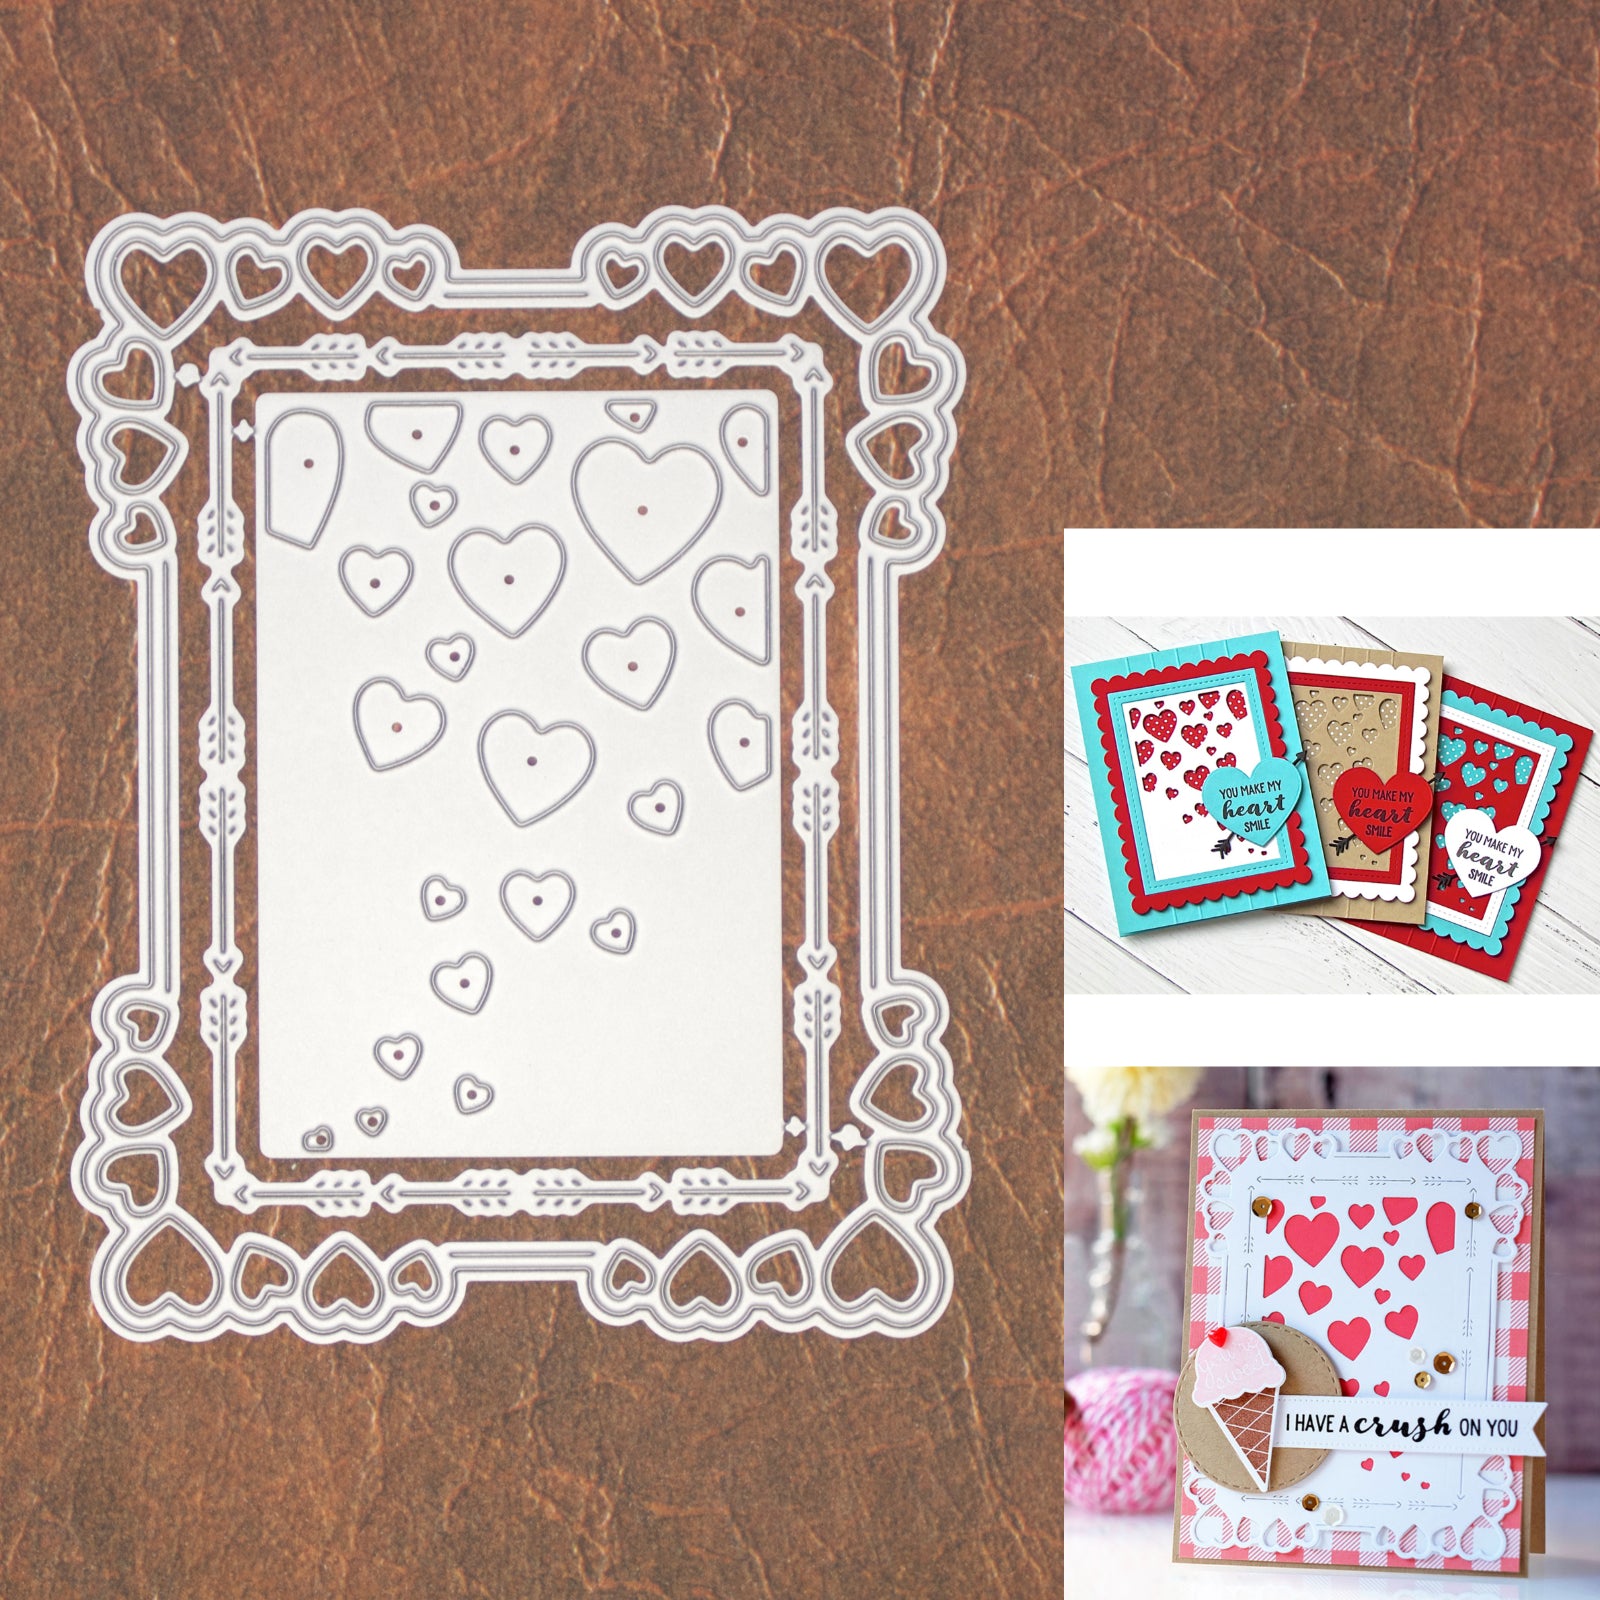 Hearts Backgrounds w Arrows Frame Cutting Dies